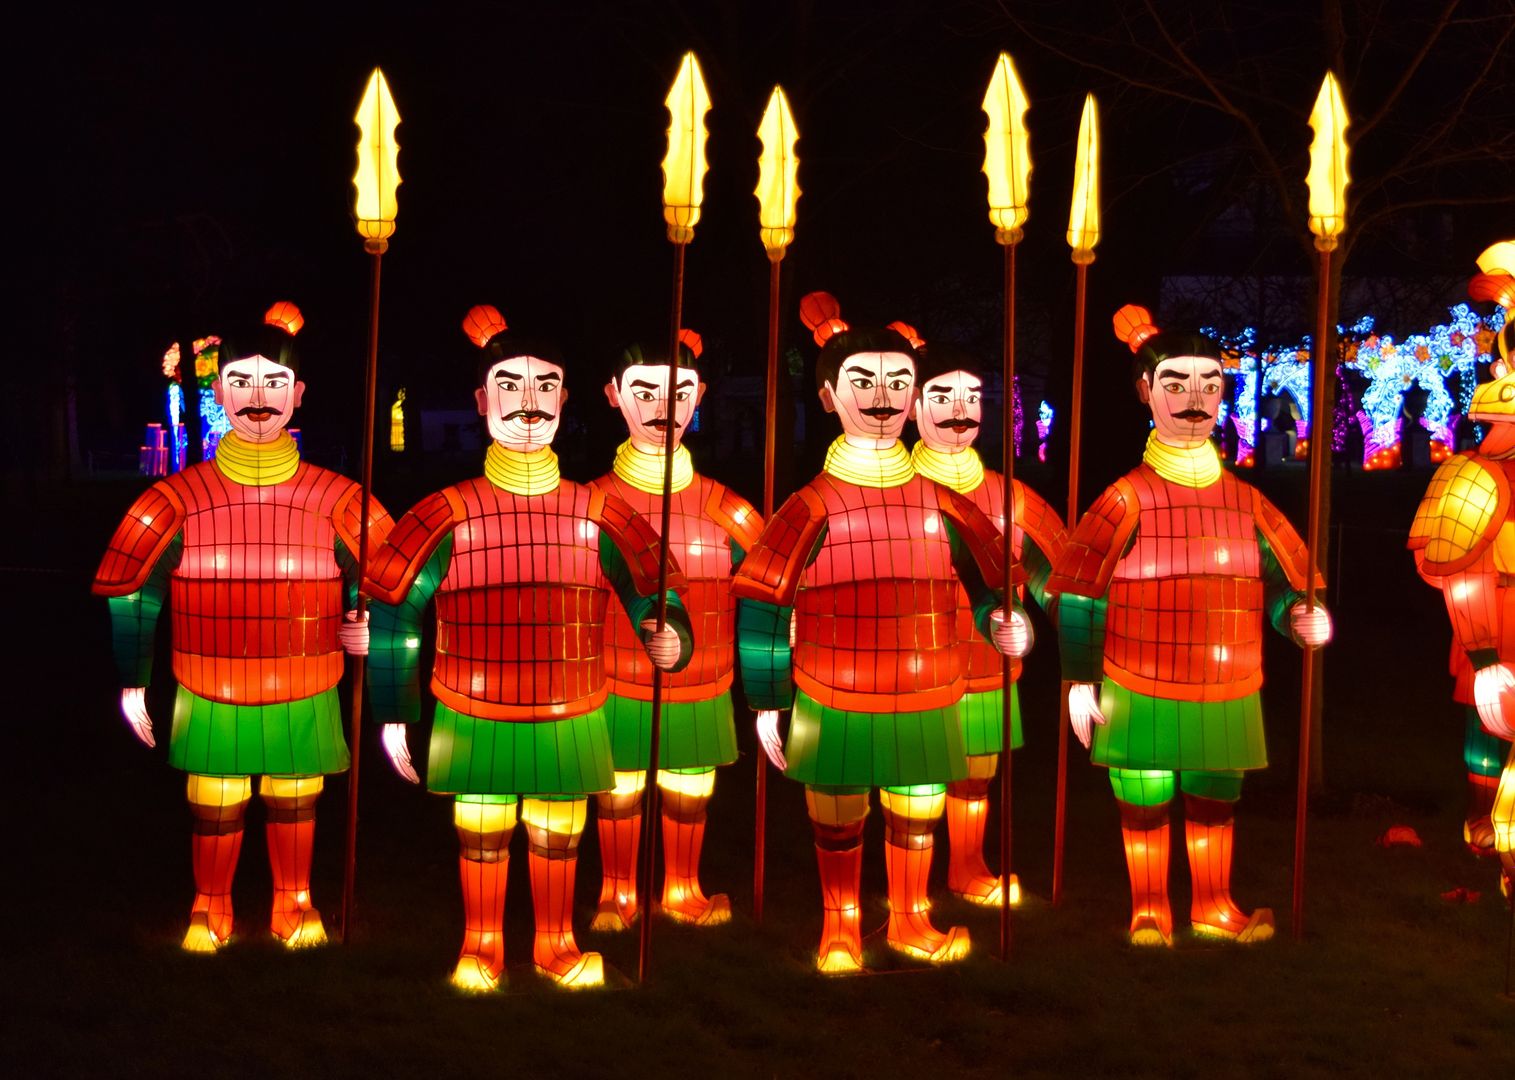 Military Soldiers Magical Lantern Festival Chiswick | The LDN Diaries